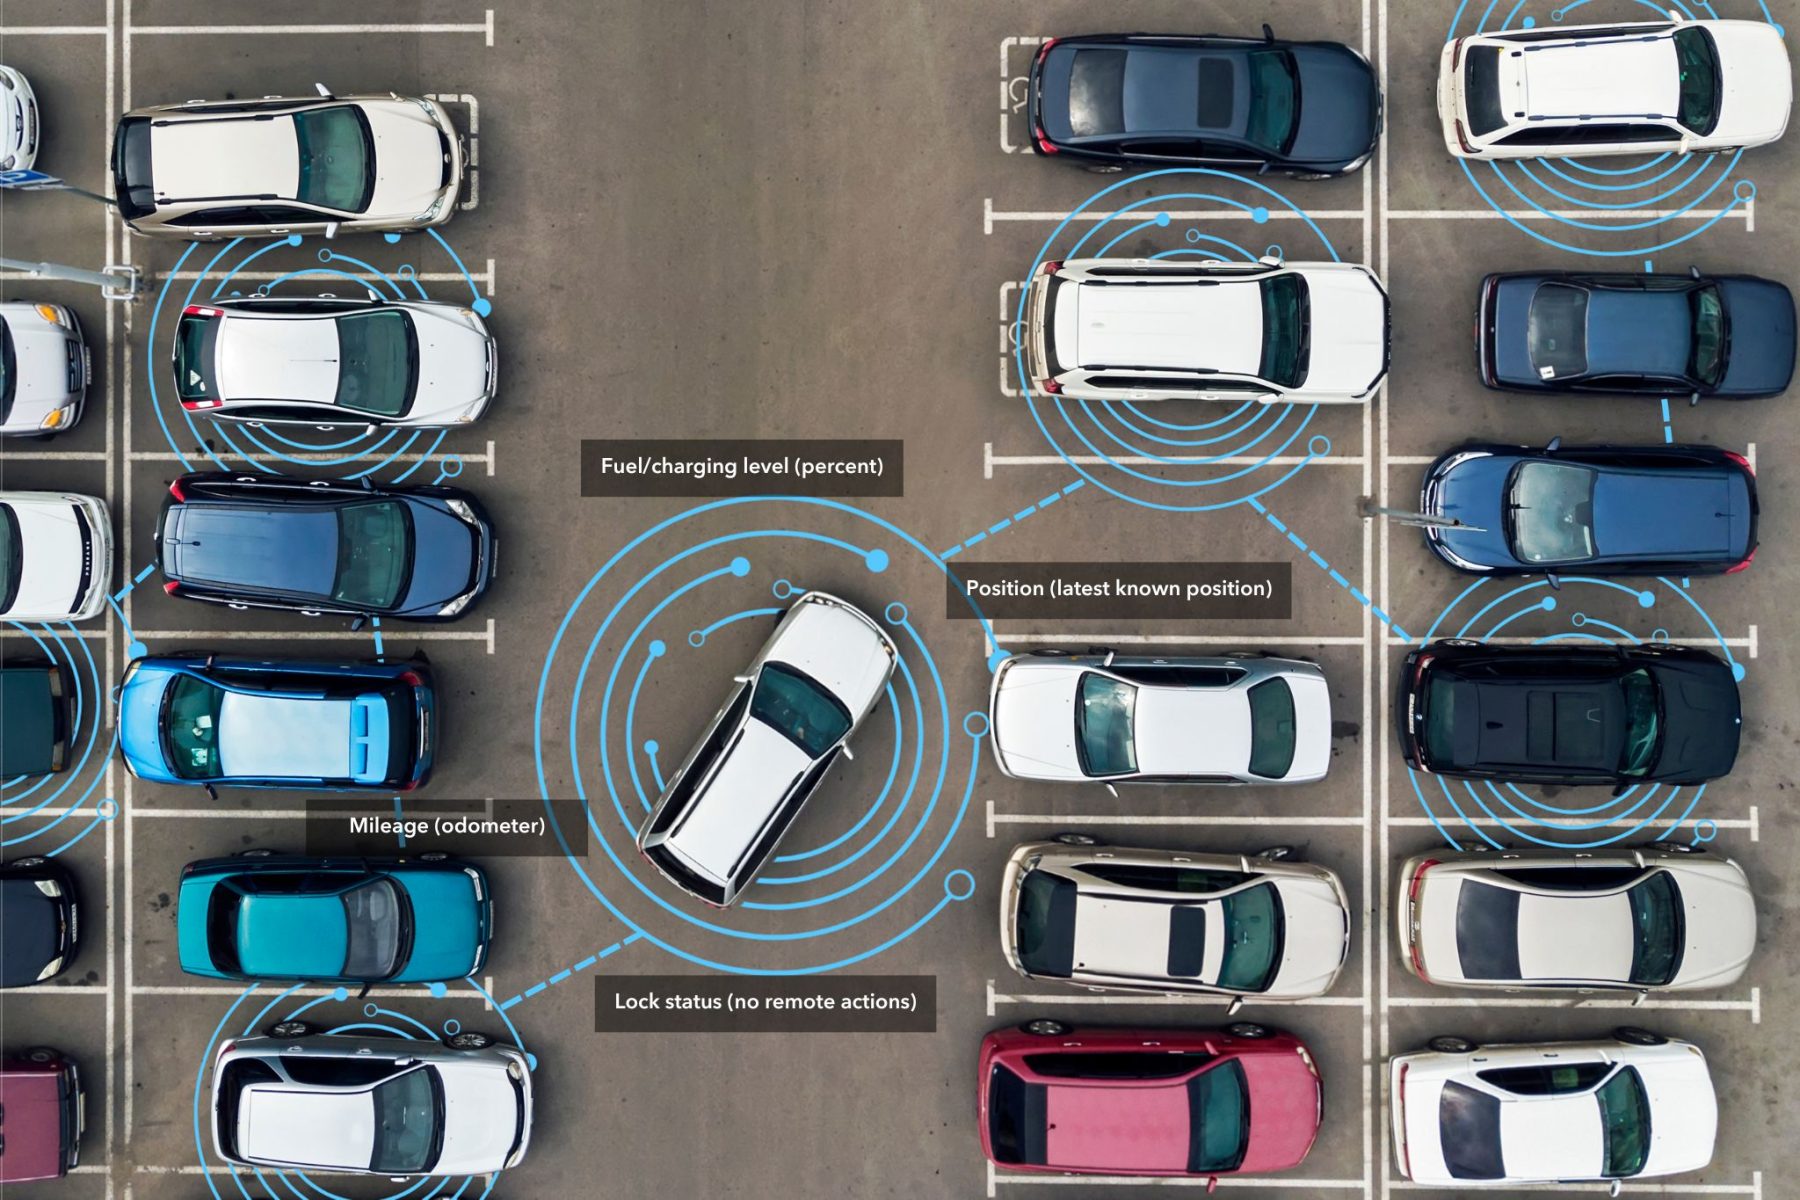 Cars in the parking lot with data points